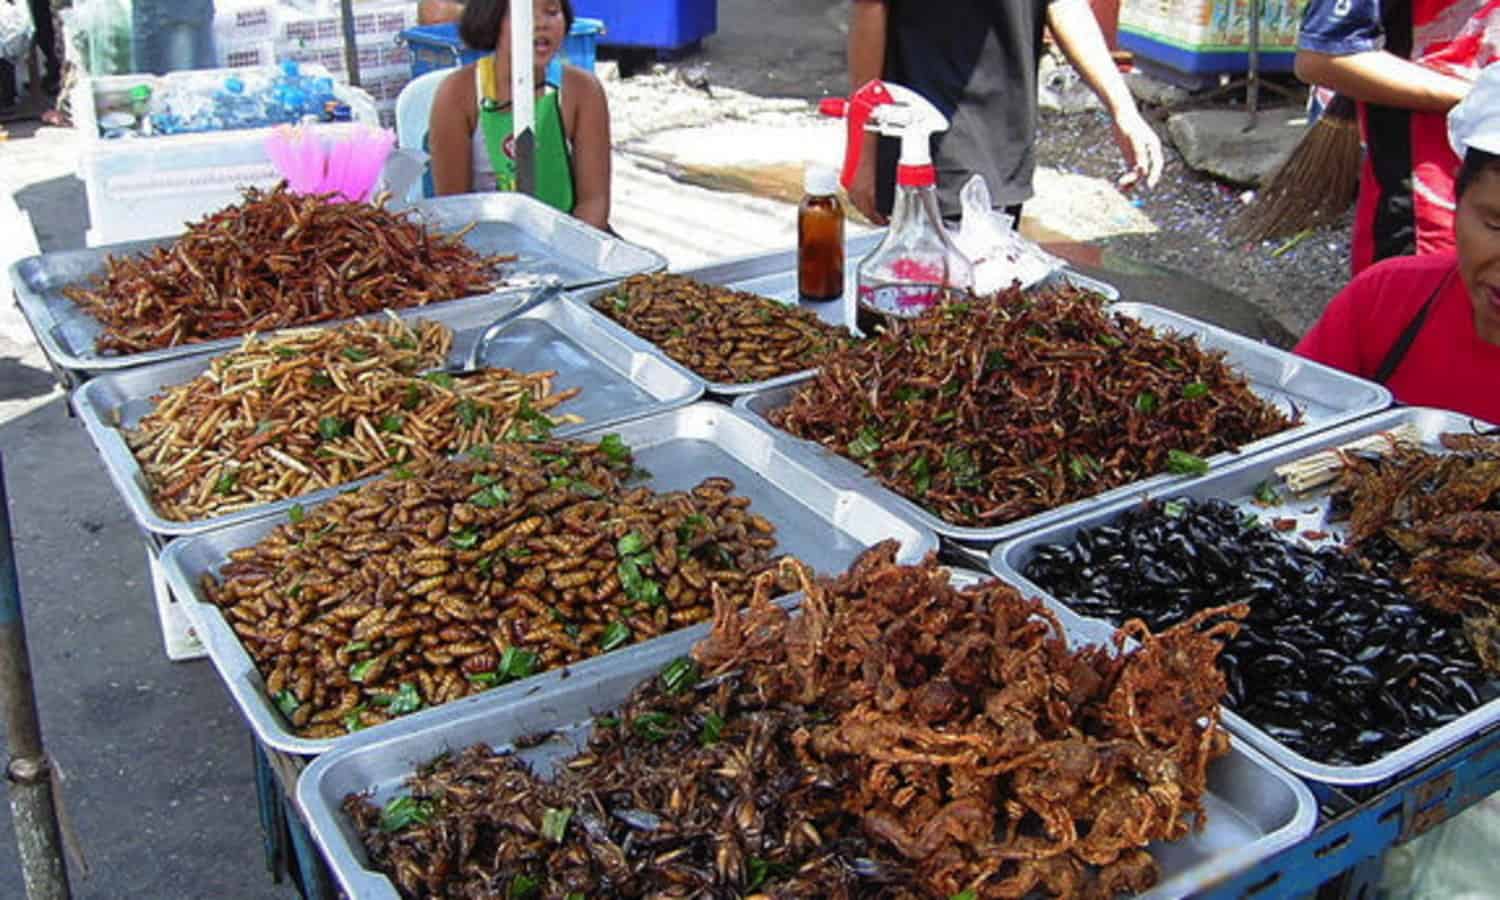 Edible insects have long been a part of the human diet and are commonly consumed as a food source in many regions of the world. It is estimated that two billion people currently consume insects as part of their diets.